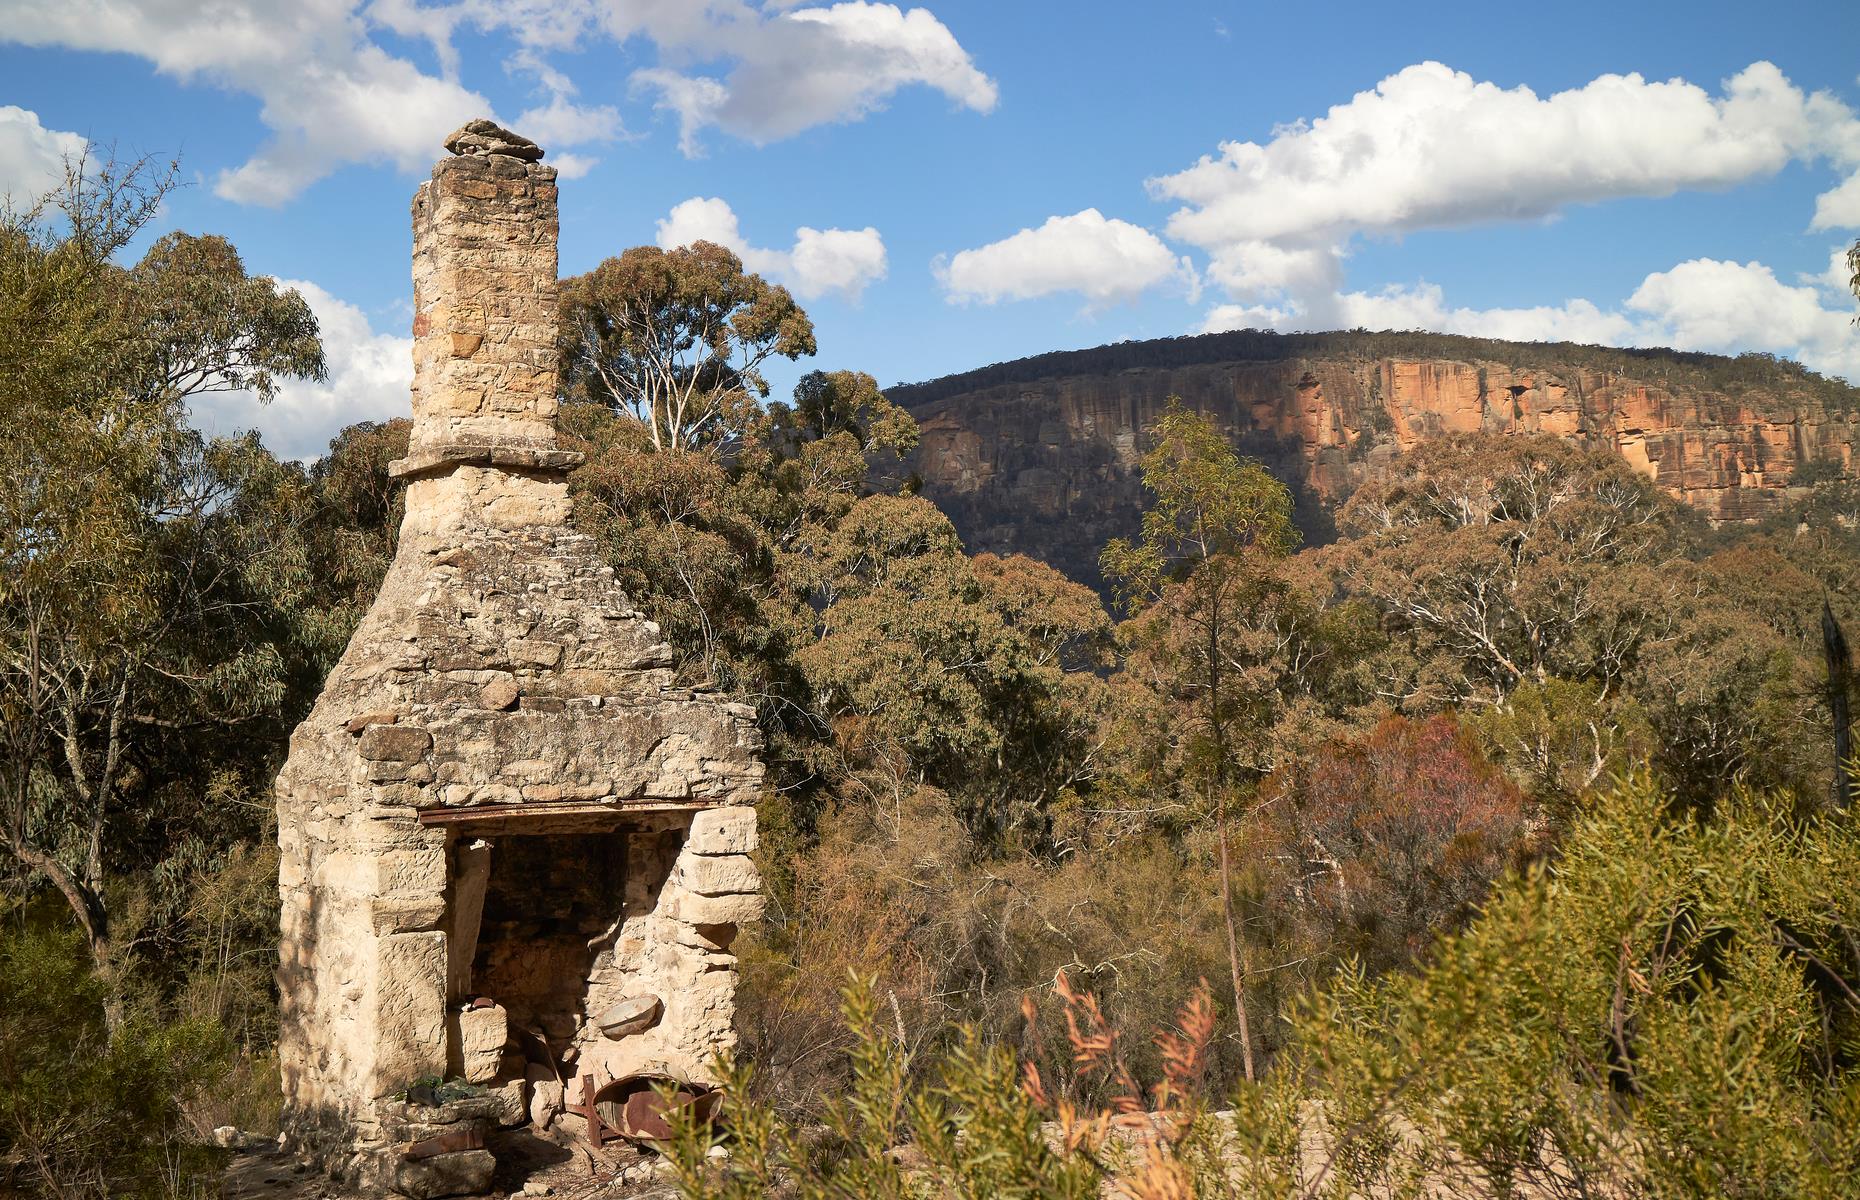 Peeping out from undergrowth of Capertee National Park are the ruins of old mining sites that once operated in this region west of the Blue Mountains. Today hikers can follow historic trails to admire the crumbling ruins and scenic mountain views. The Capertee Woolshed remains are also worth seeking out: the tumbledown corrugated iron structure is a striking remnant of the region’s pastoral past.